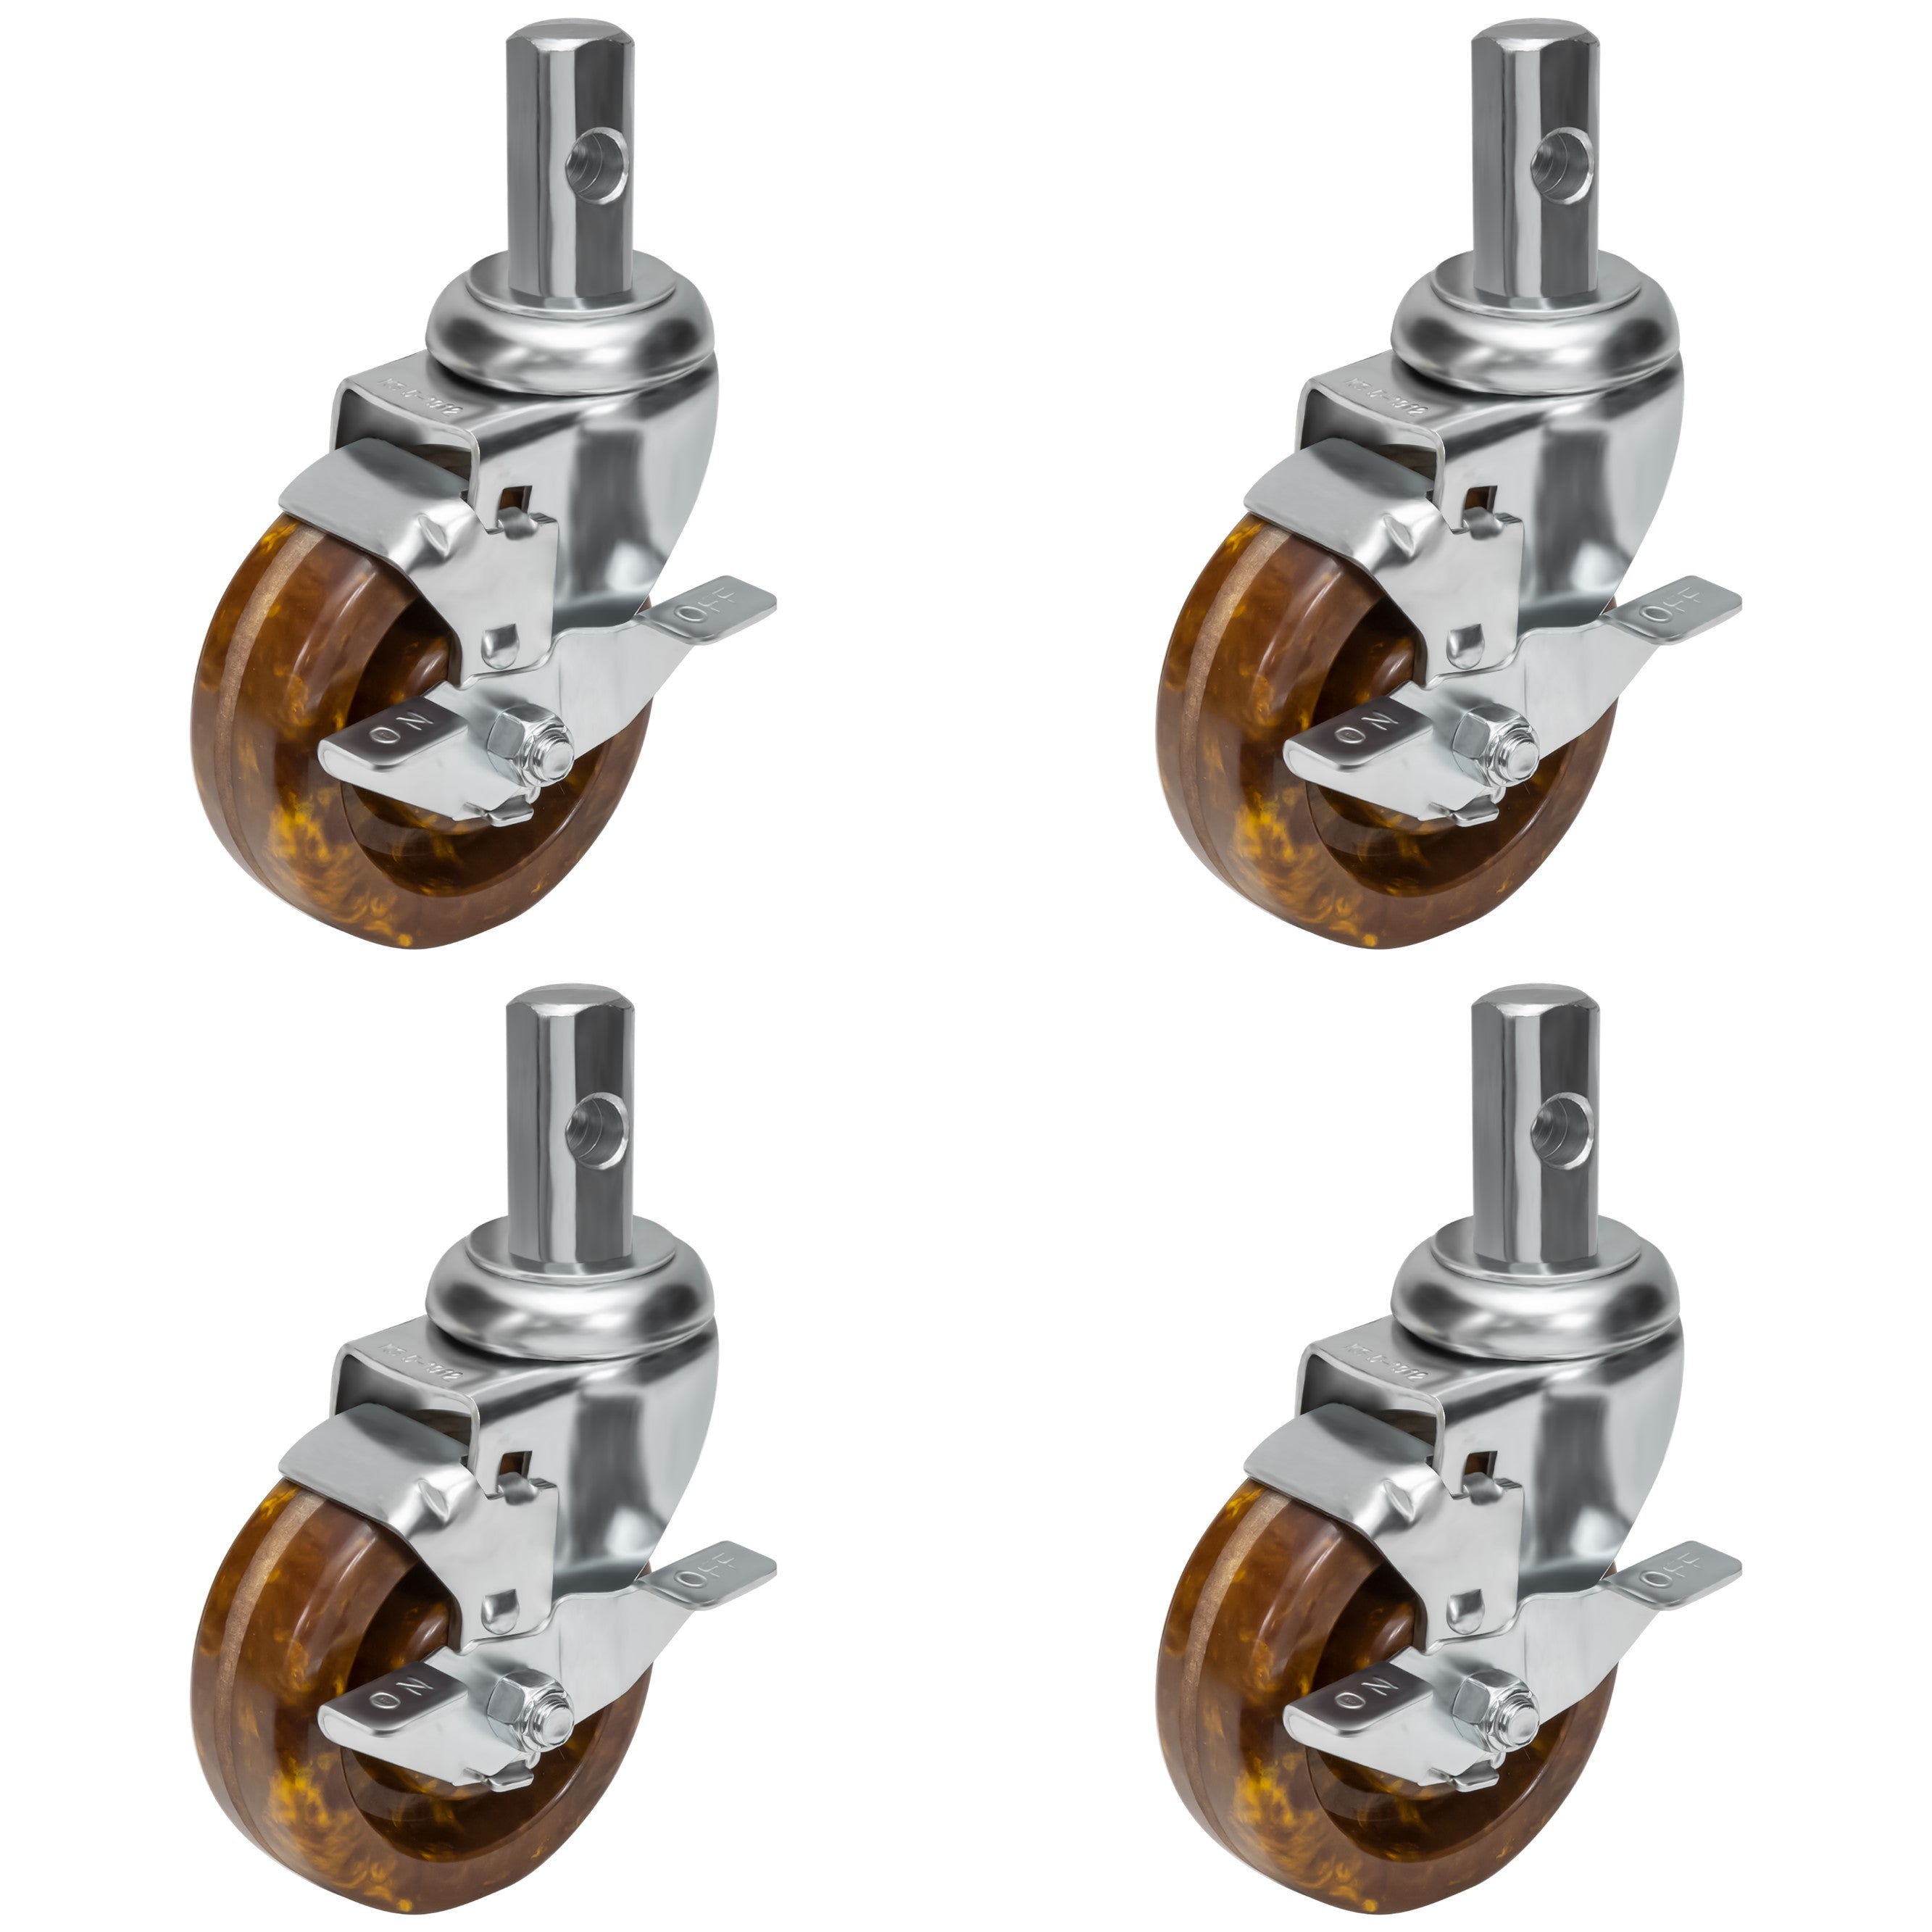 GSW 4" High-Temperature Oven Rack Casters - Square Stem Casters - Set of 4 Phenolic Casters with 1200 Lbs Loading Capacity for Pan Racks (Swivel with Brake)